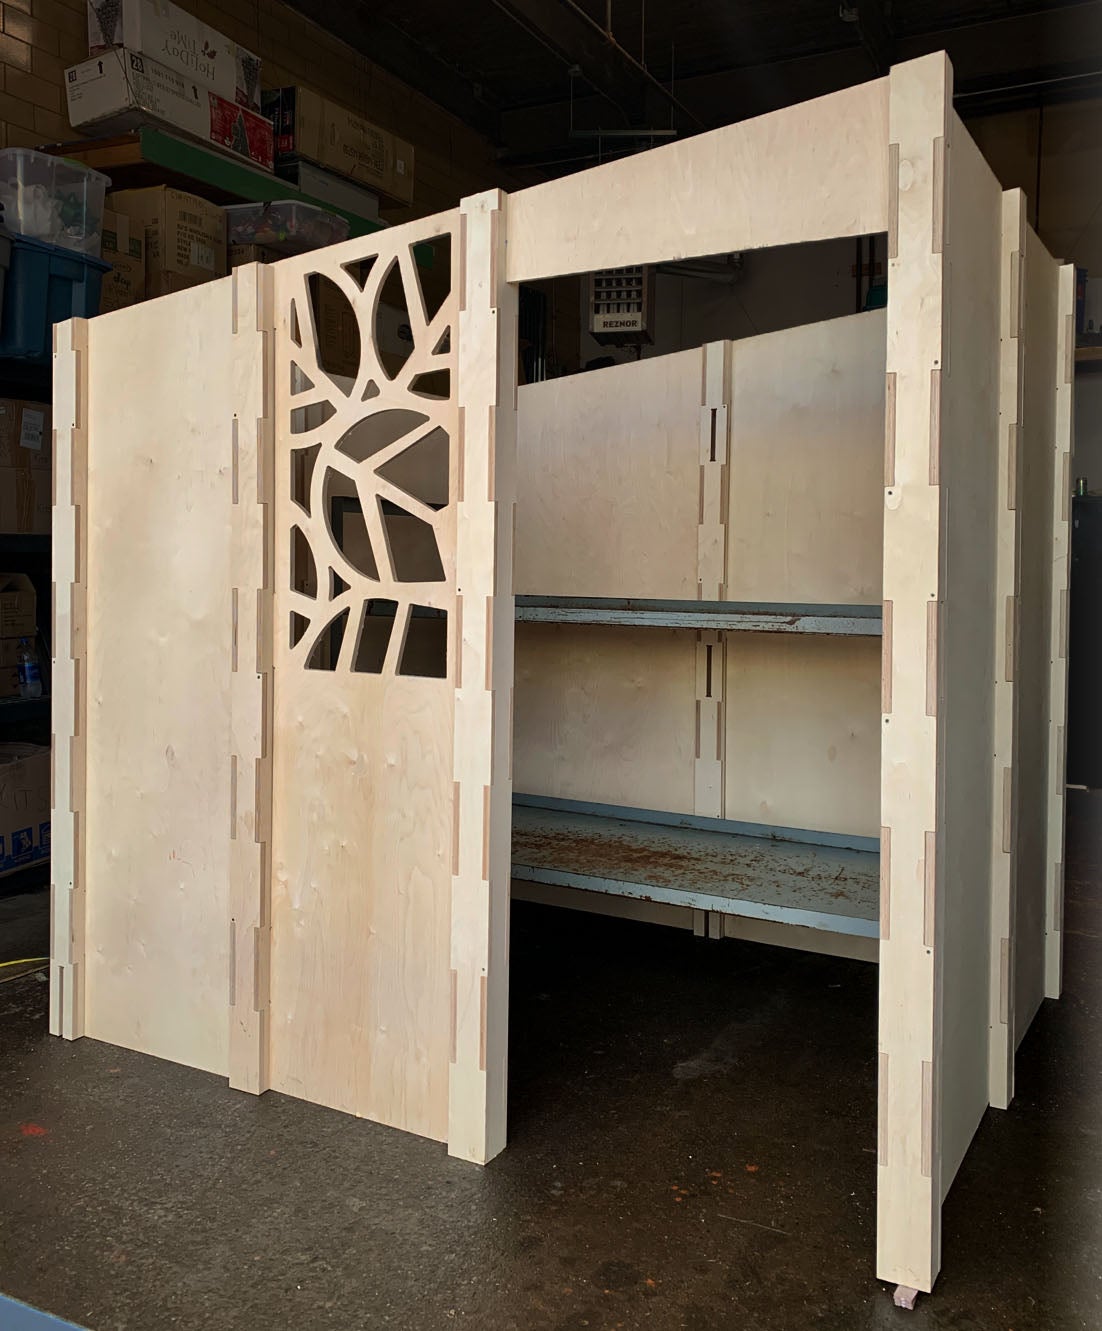 A wooden pod with a door, window, and space for a cot.